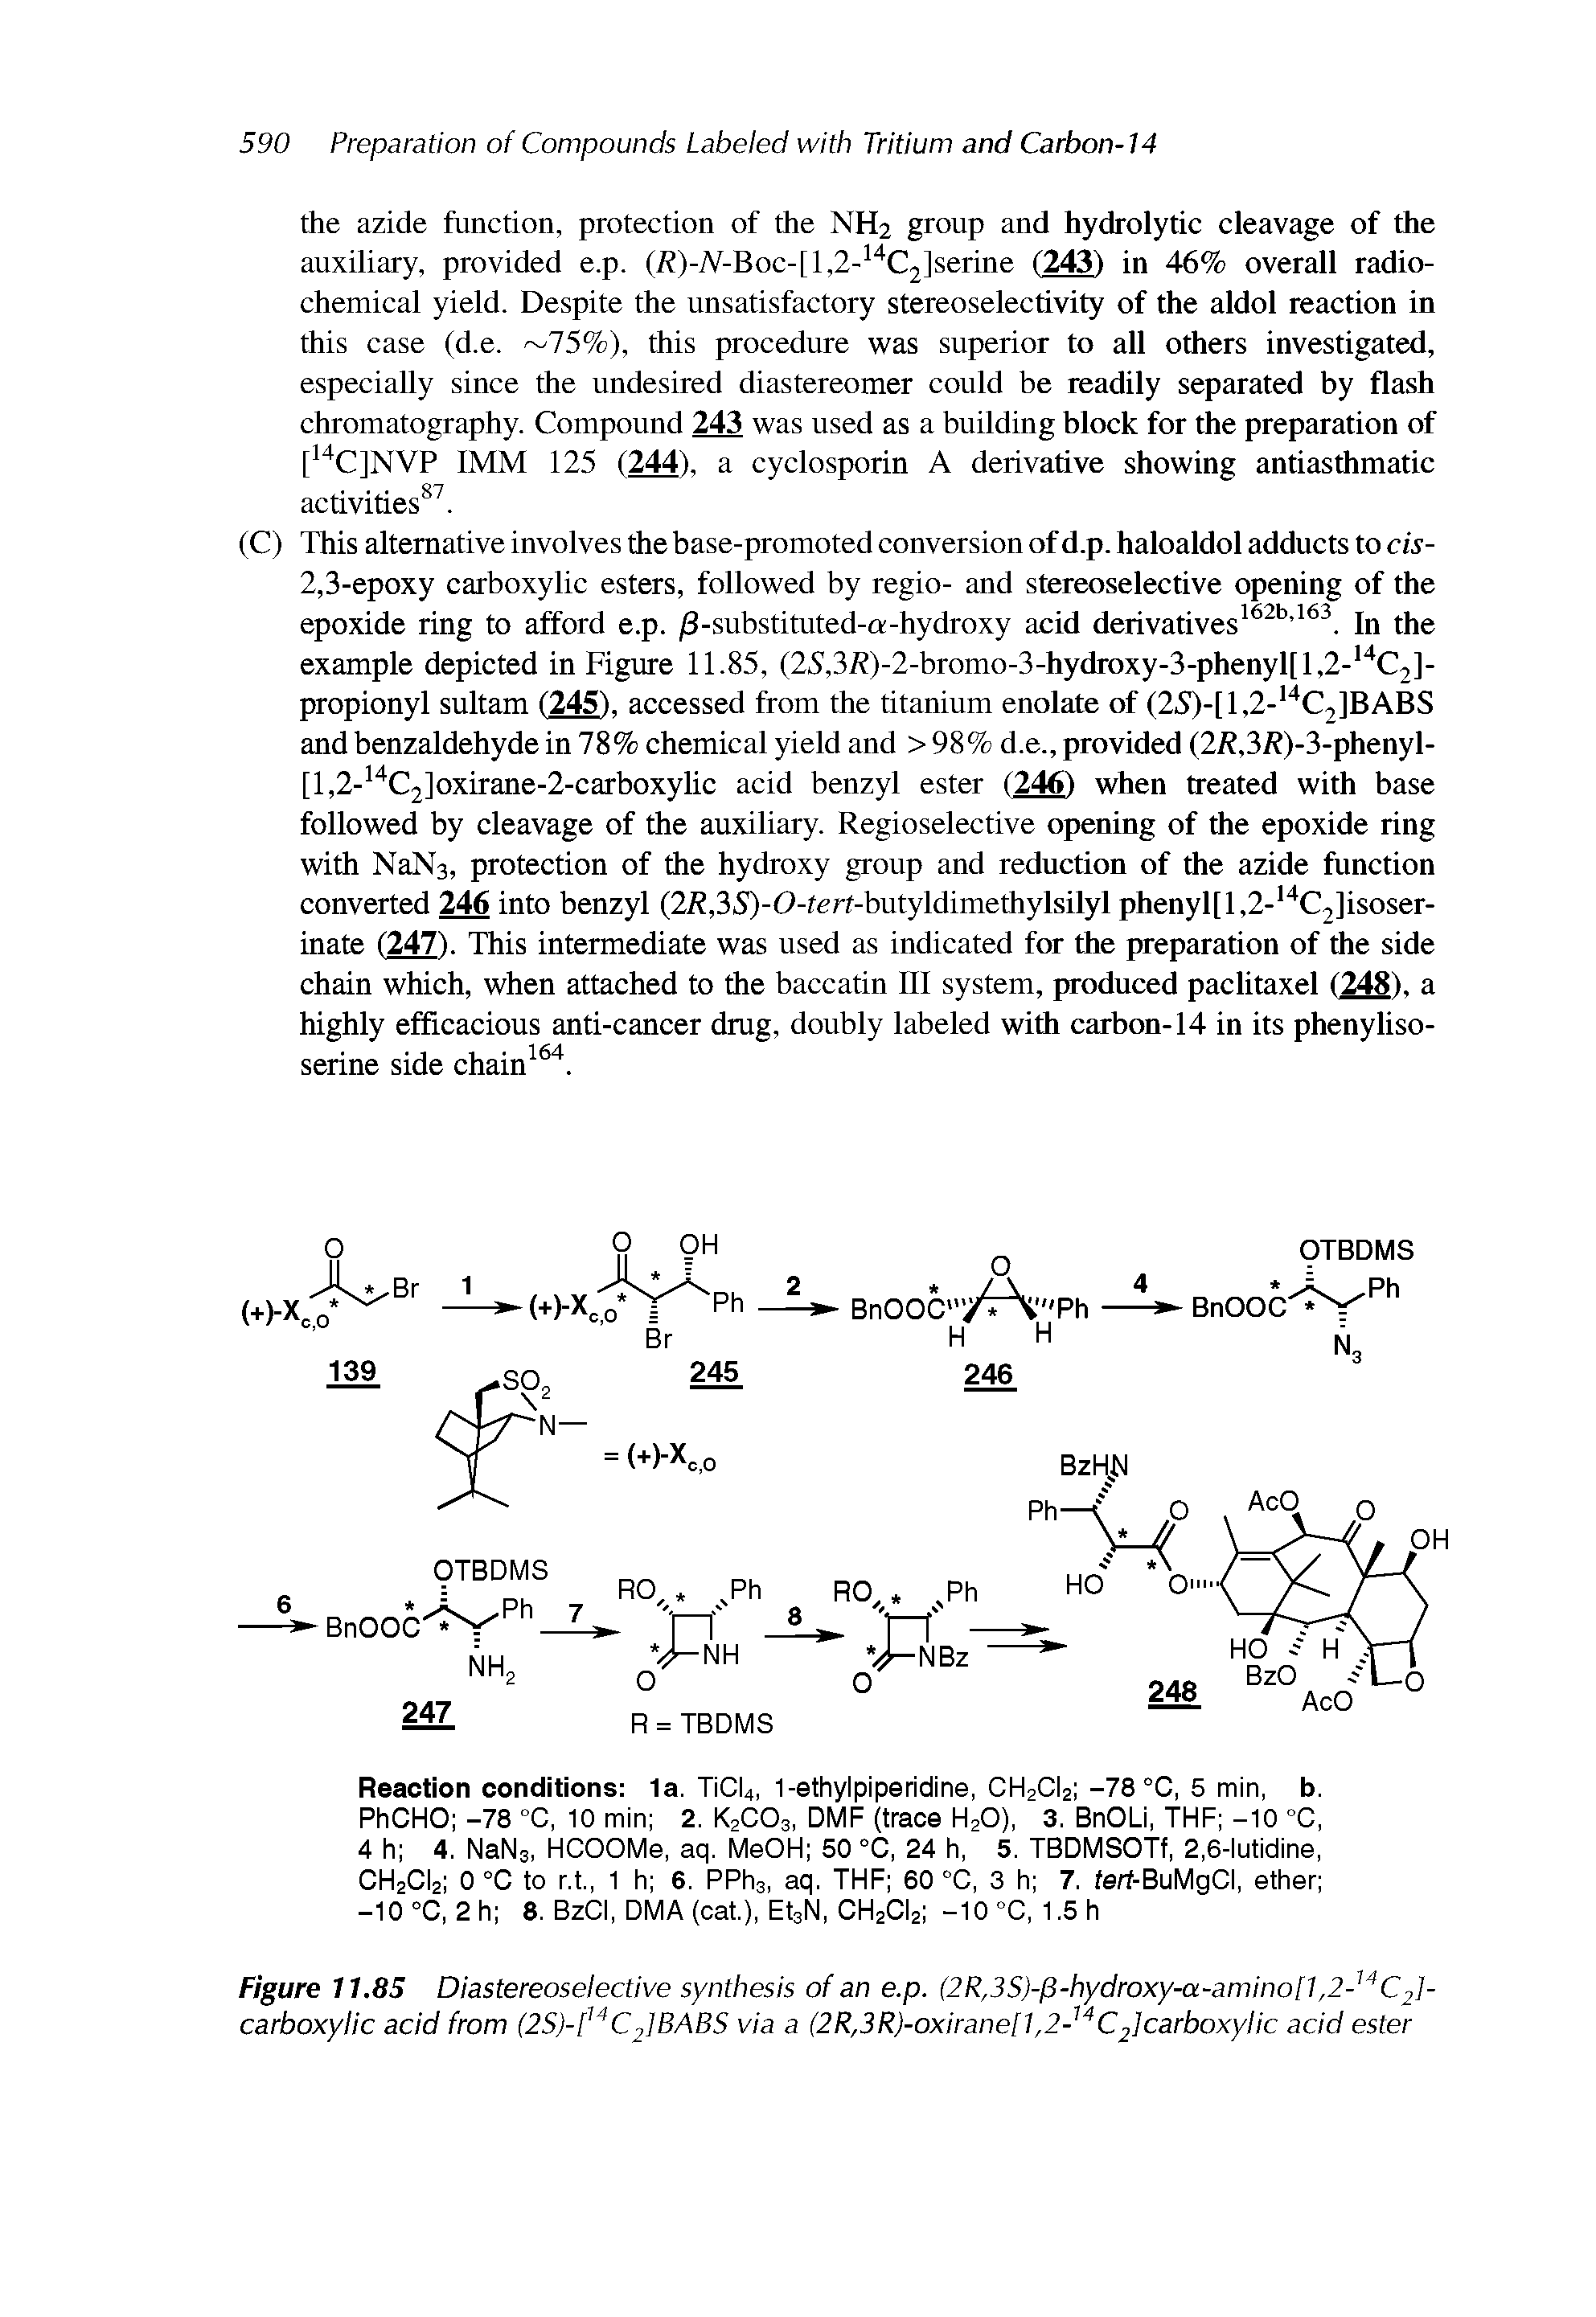 Figure 11.85 Diastereoselective synthesis of an e.p. (2R,3S)-p-hydroxy-a-amino[l,2- C2]-carboxylic acid from (2S)-f C2]BABS via a (2R,3R)-oxirane[l,2- C2lcarboxylic acid ester...